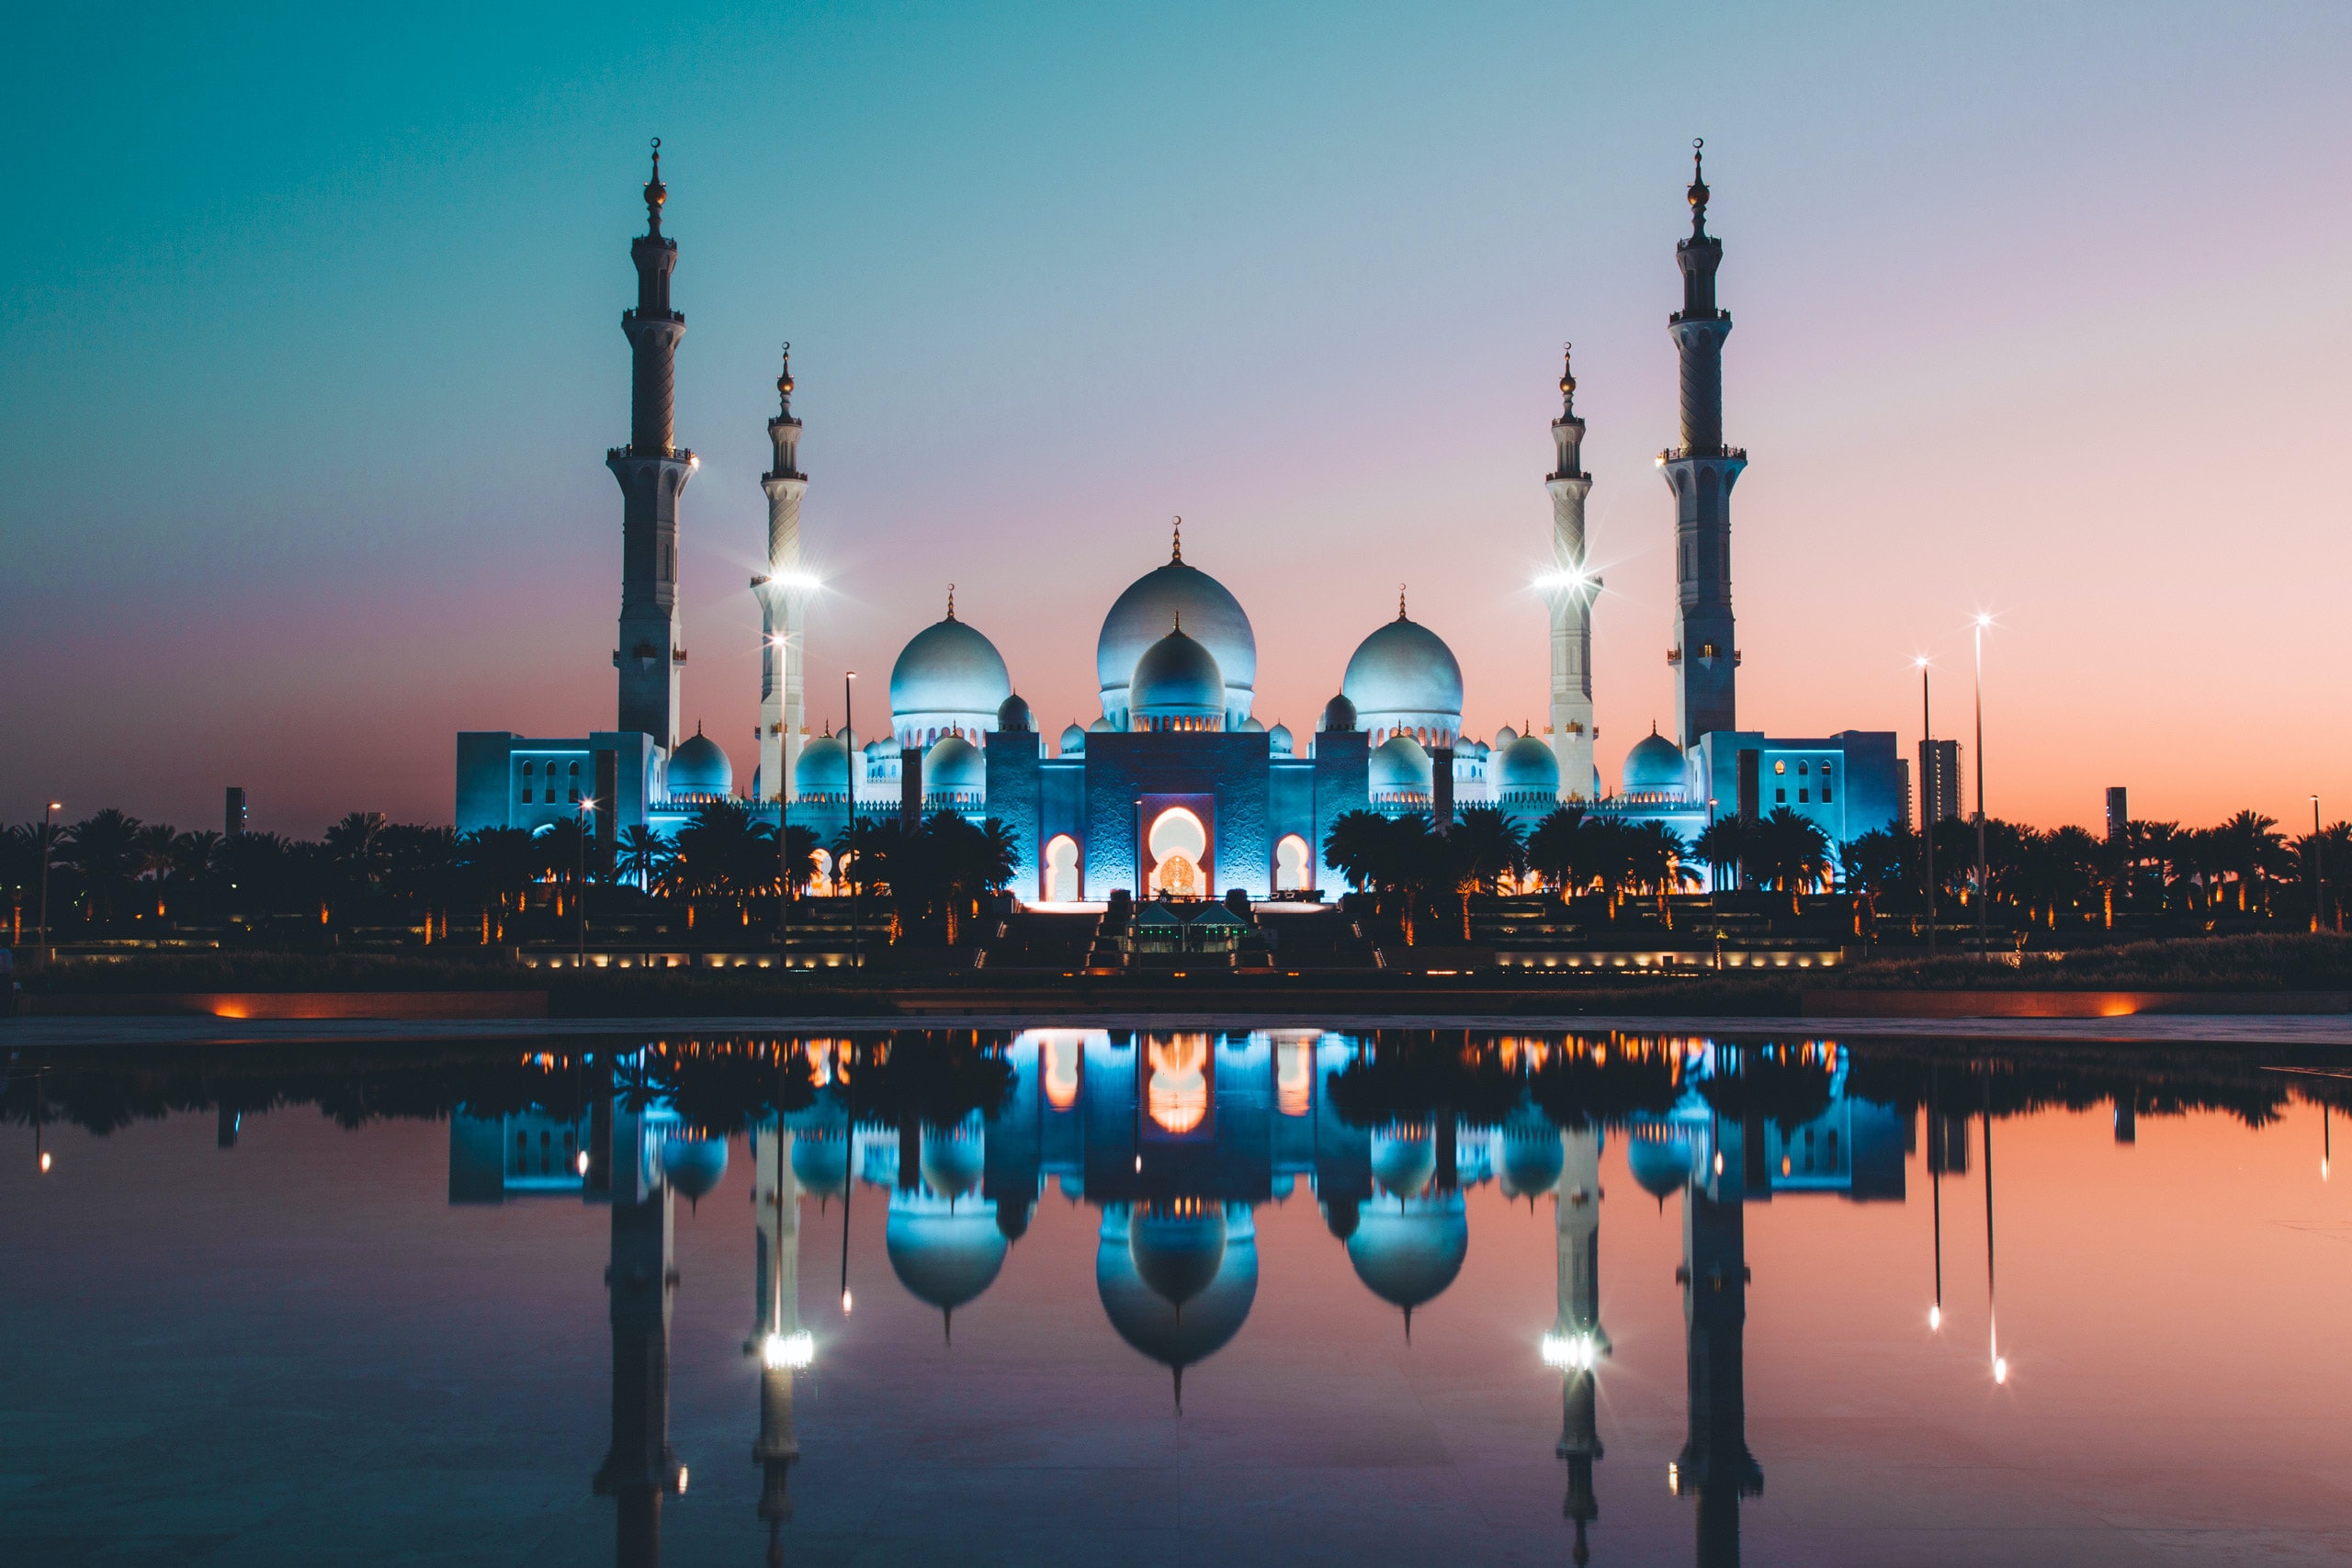 Day 7: Discover the Abu Dhabi - The Richest City in the World